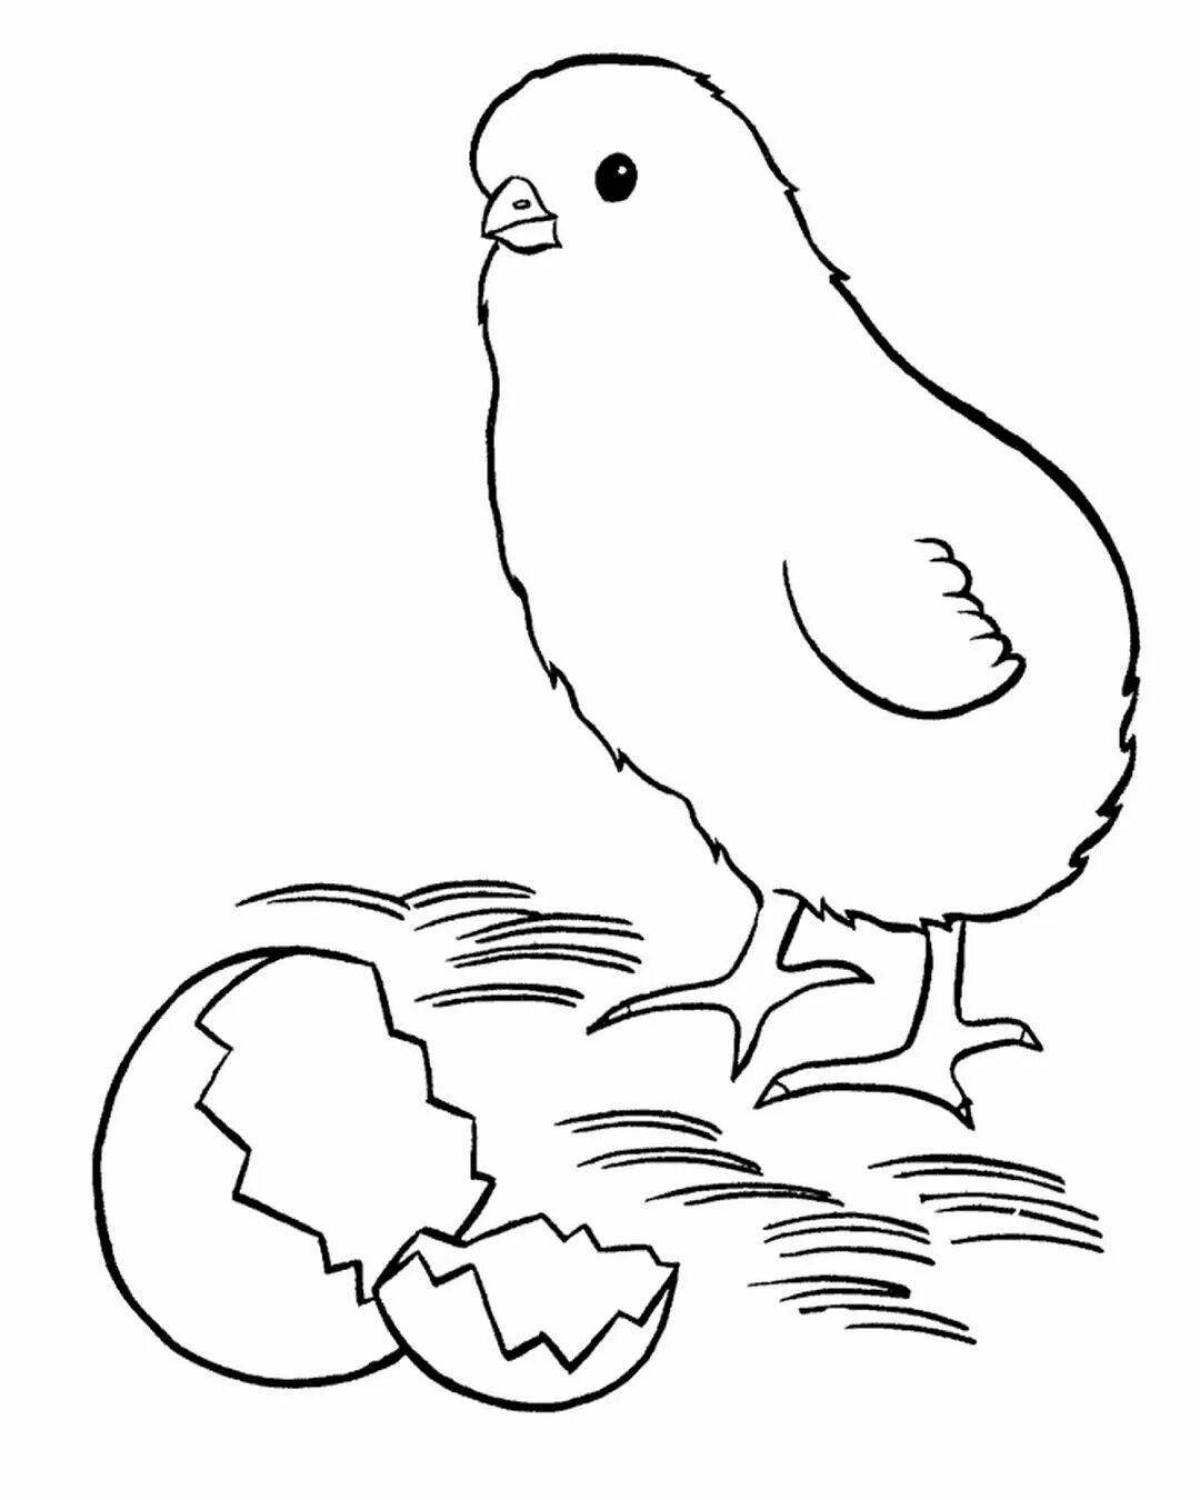 Fancy chickens coloring book for 6-7 year olds